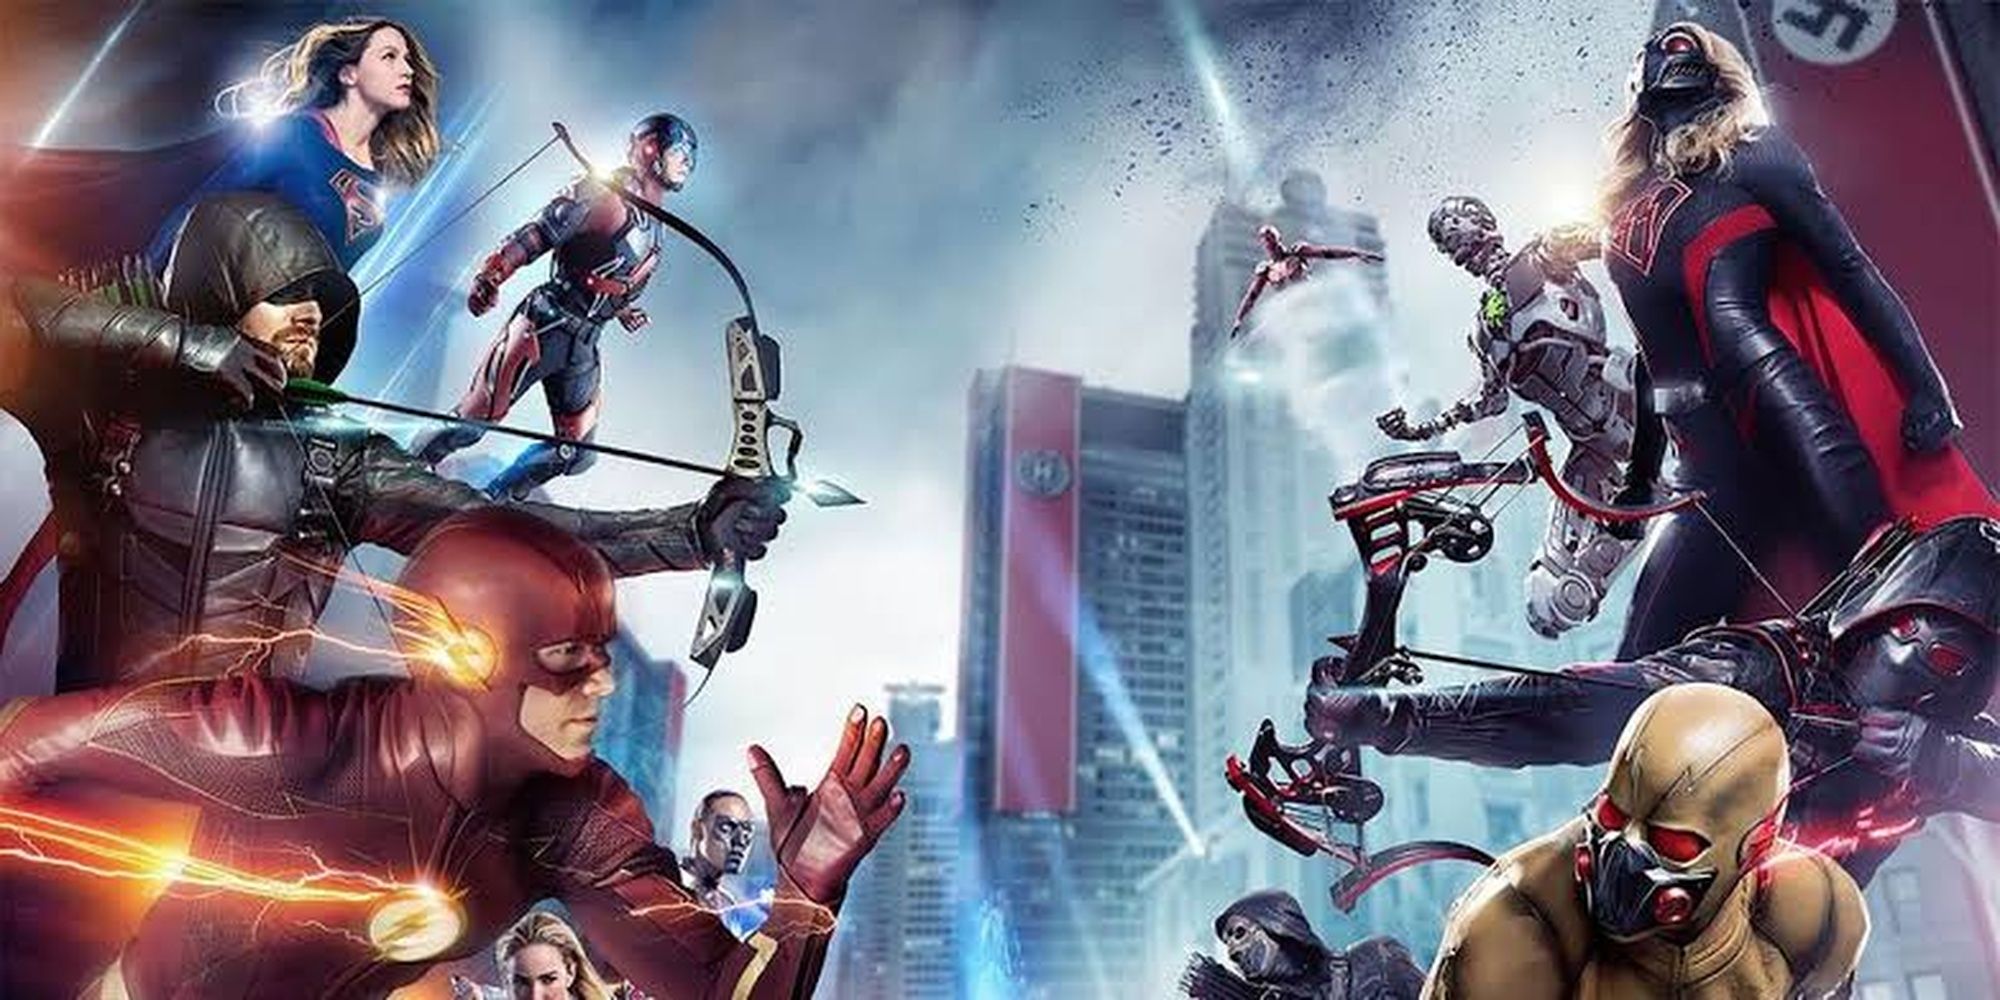 Crisis on Earth-X heroes and villains face off